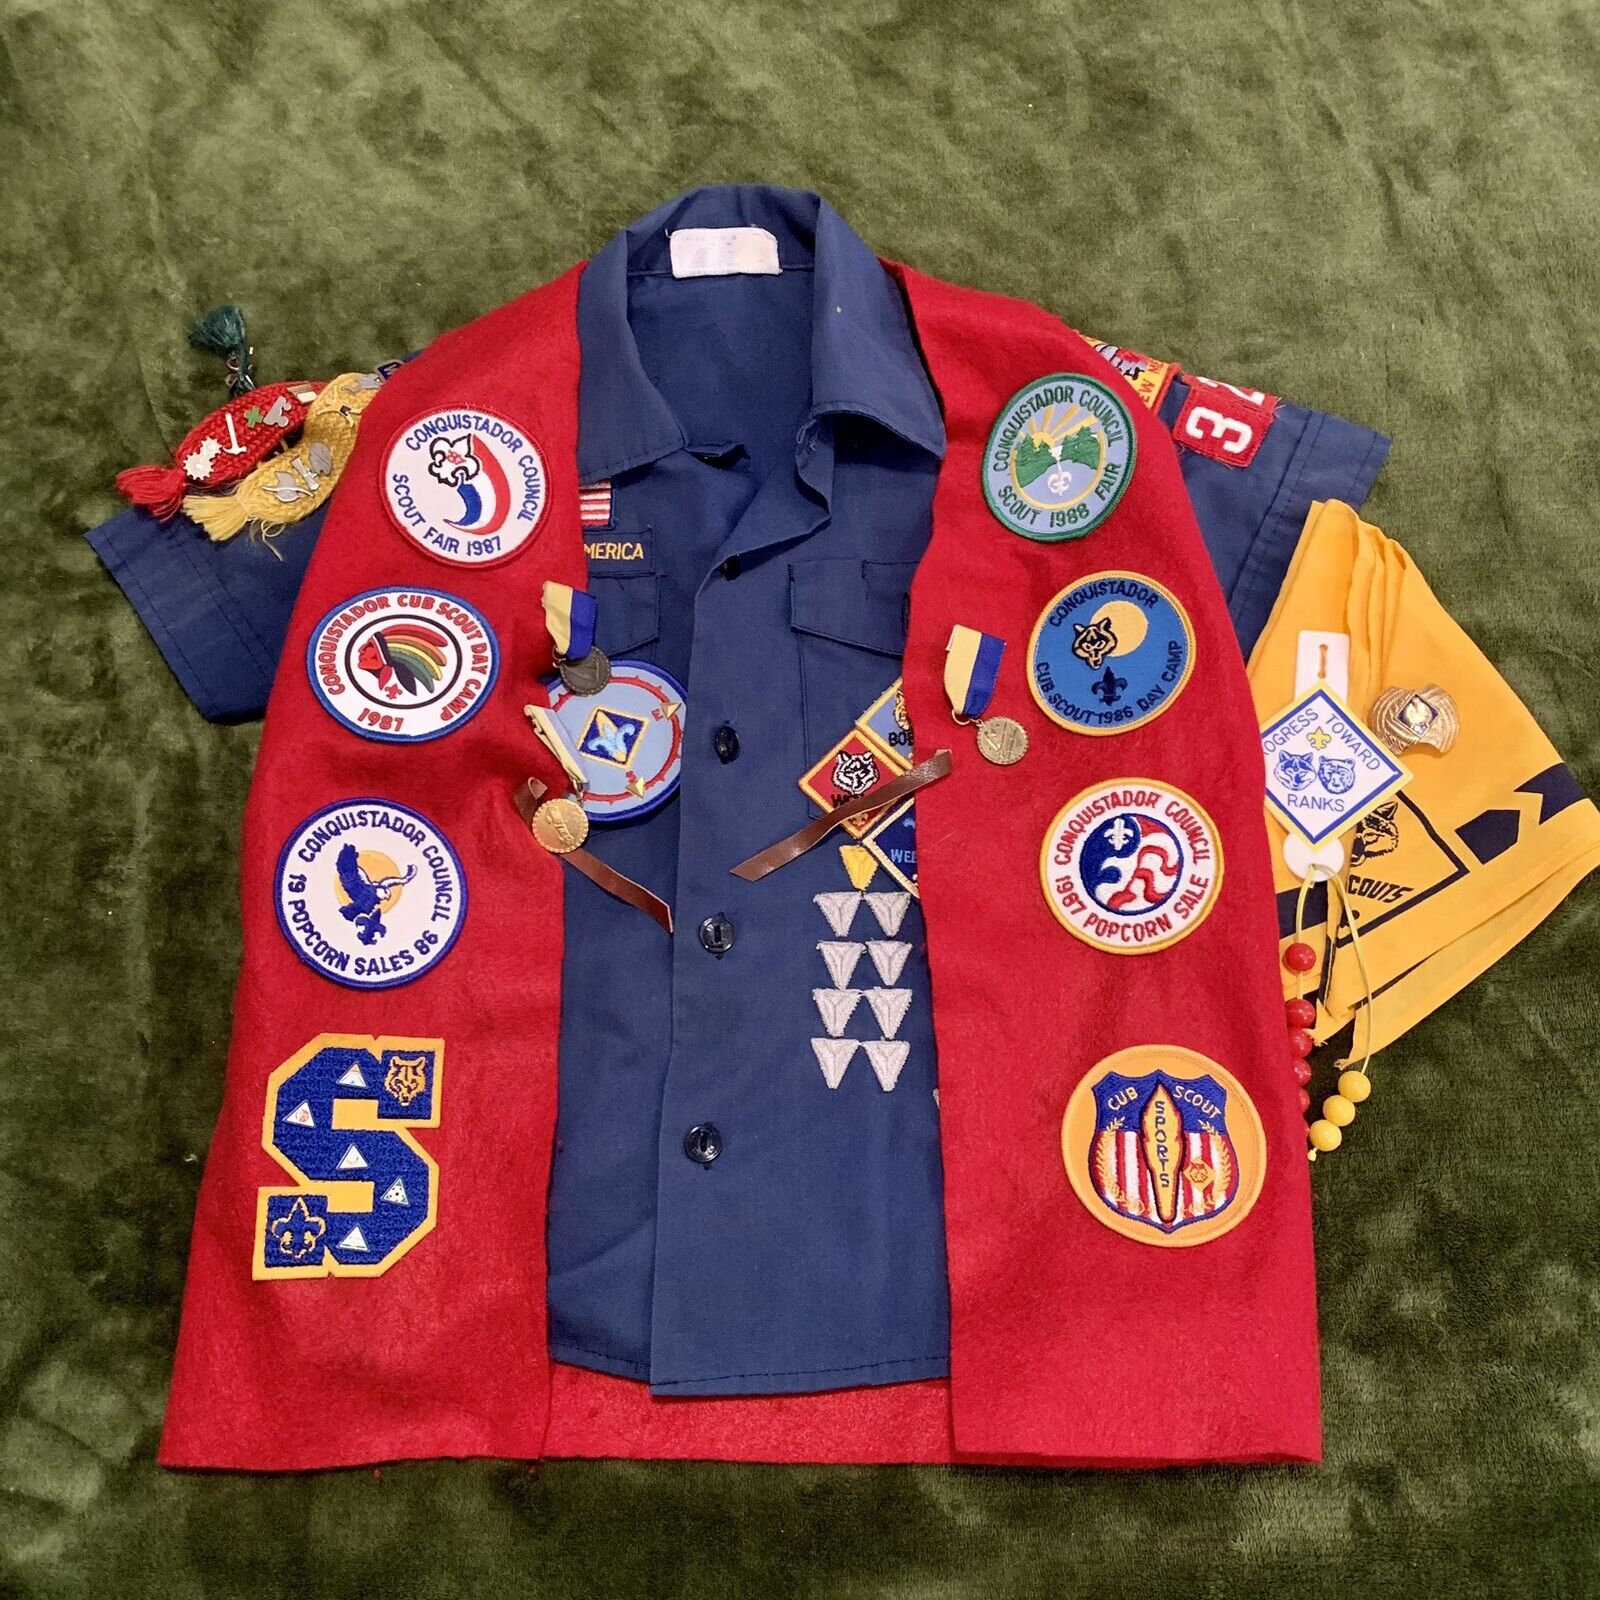 Vintage 1980s Boy Scout Uniform Shirt and Vest with Patches, Pins and Metals.